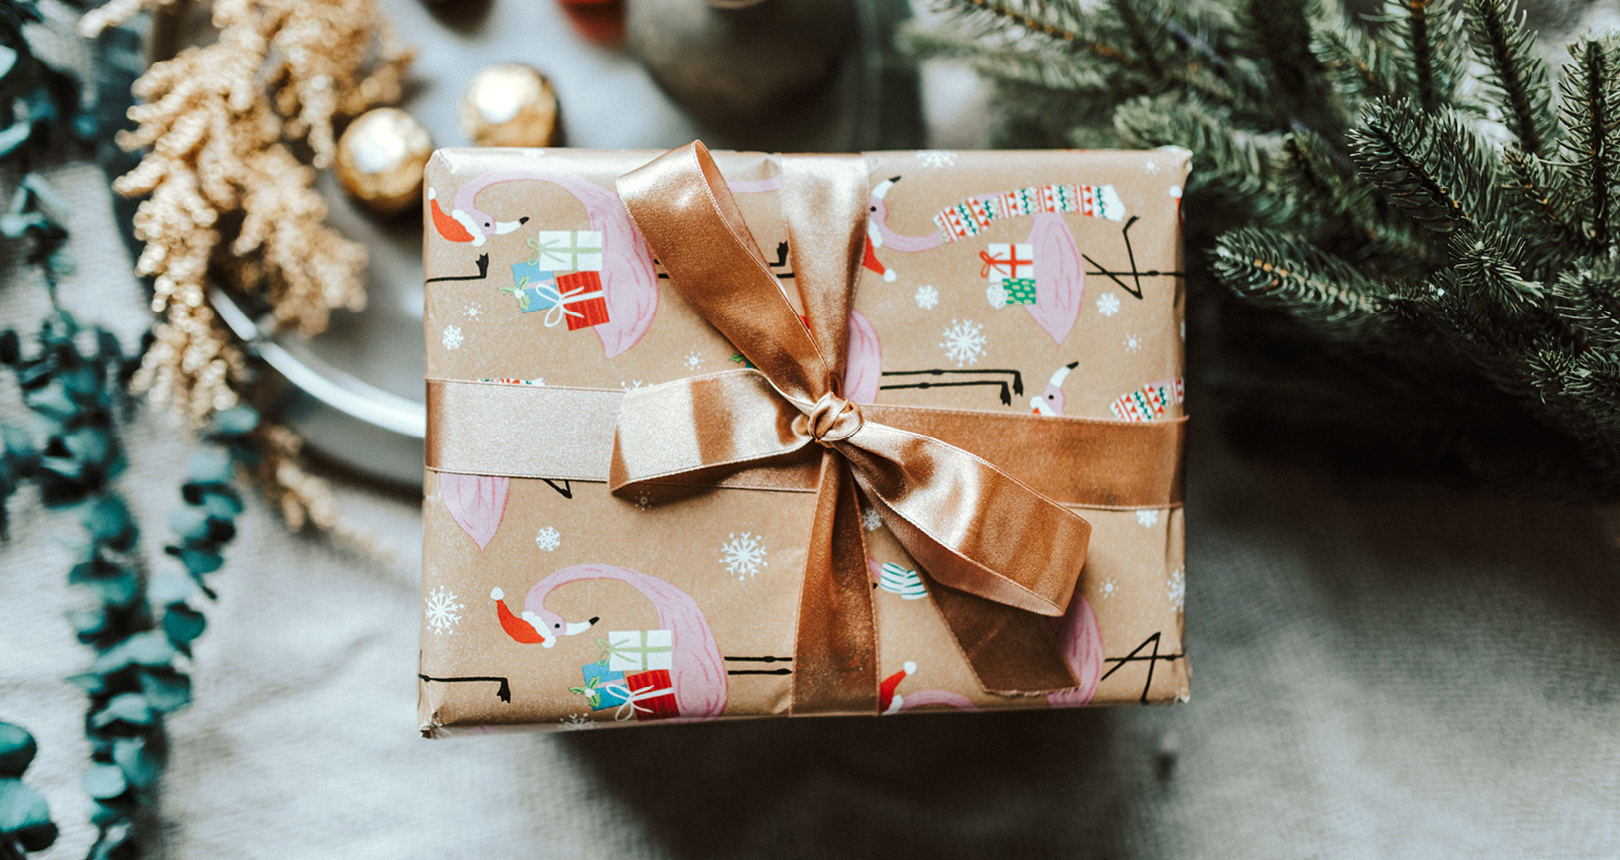 Christmas gift ideas from Brisbane businesses